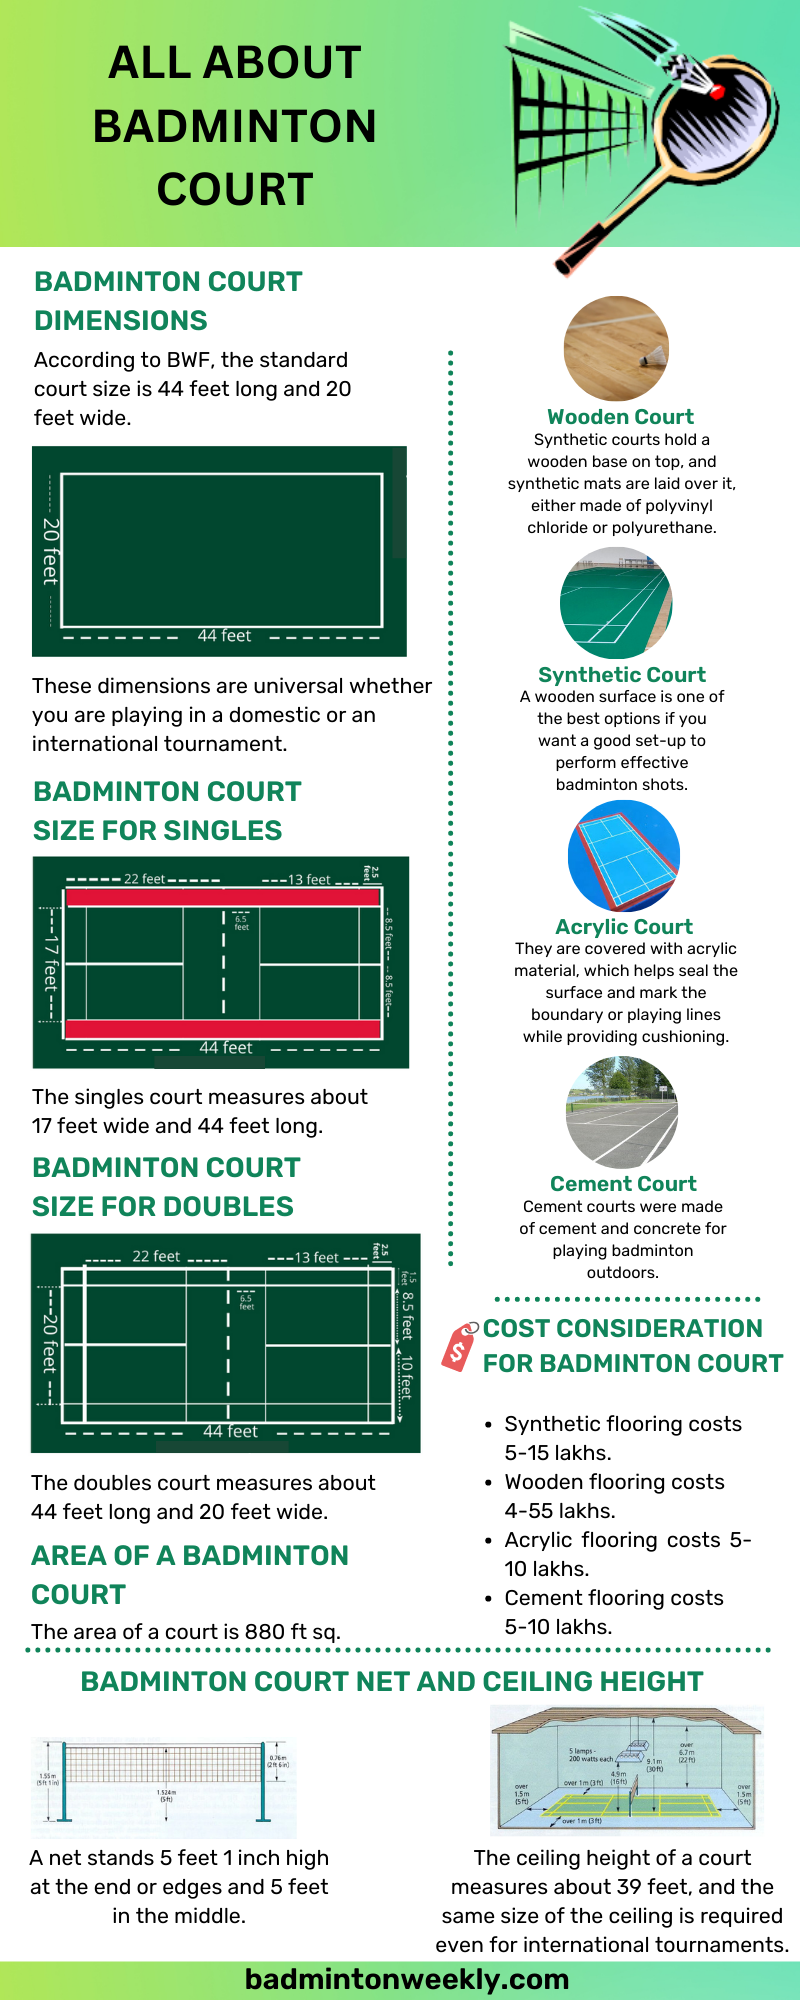 All About Badminton Court | Infographic